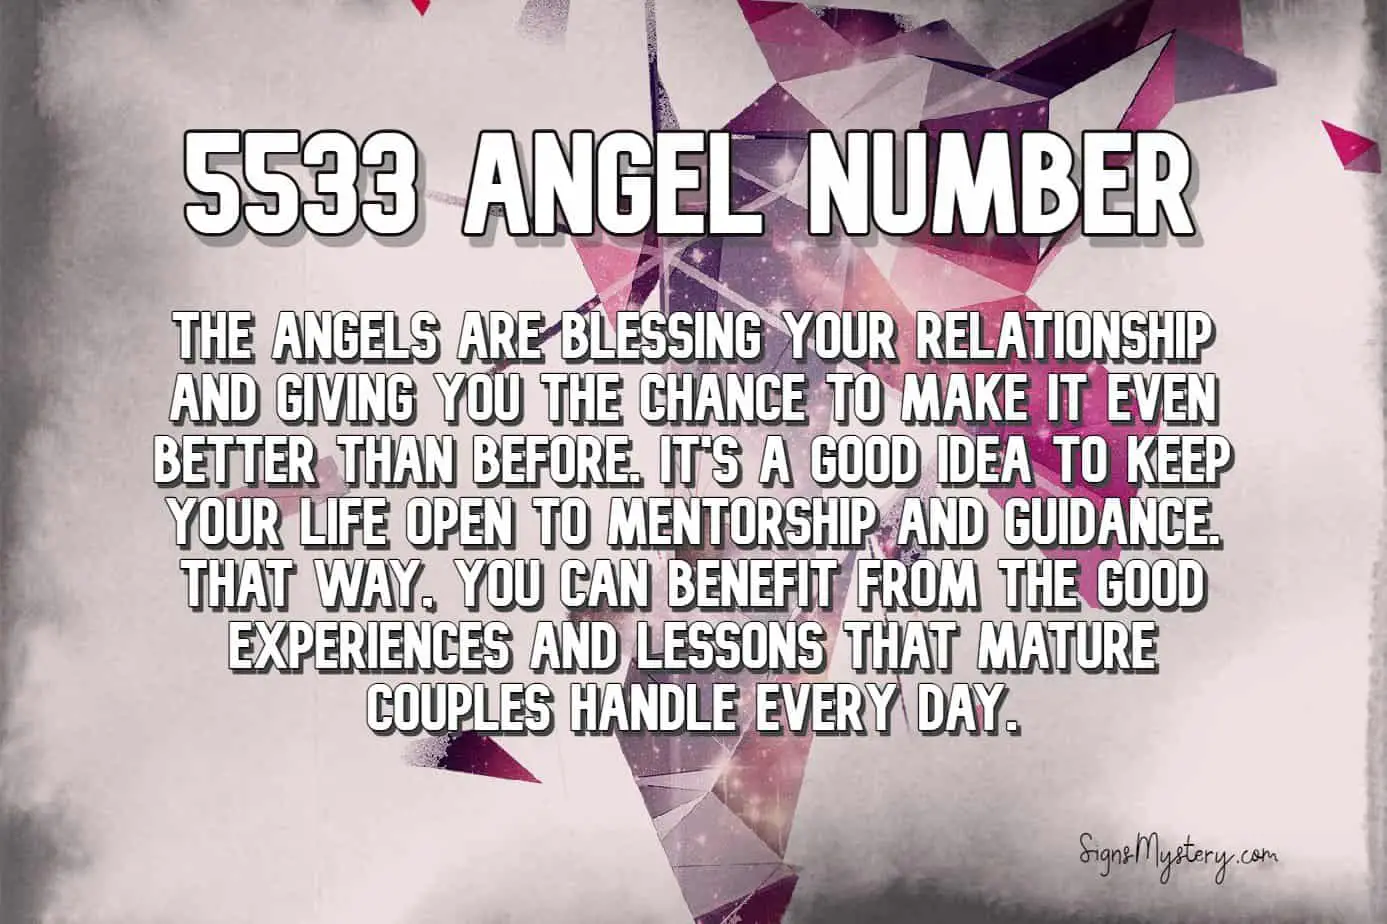 5533 angel number meaning